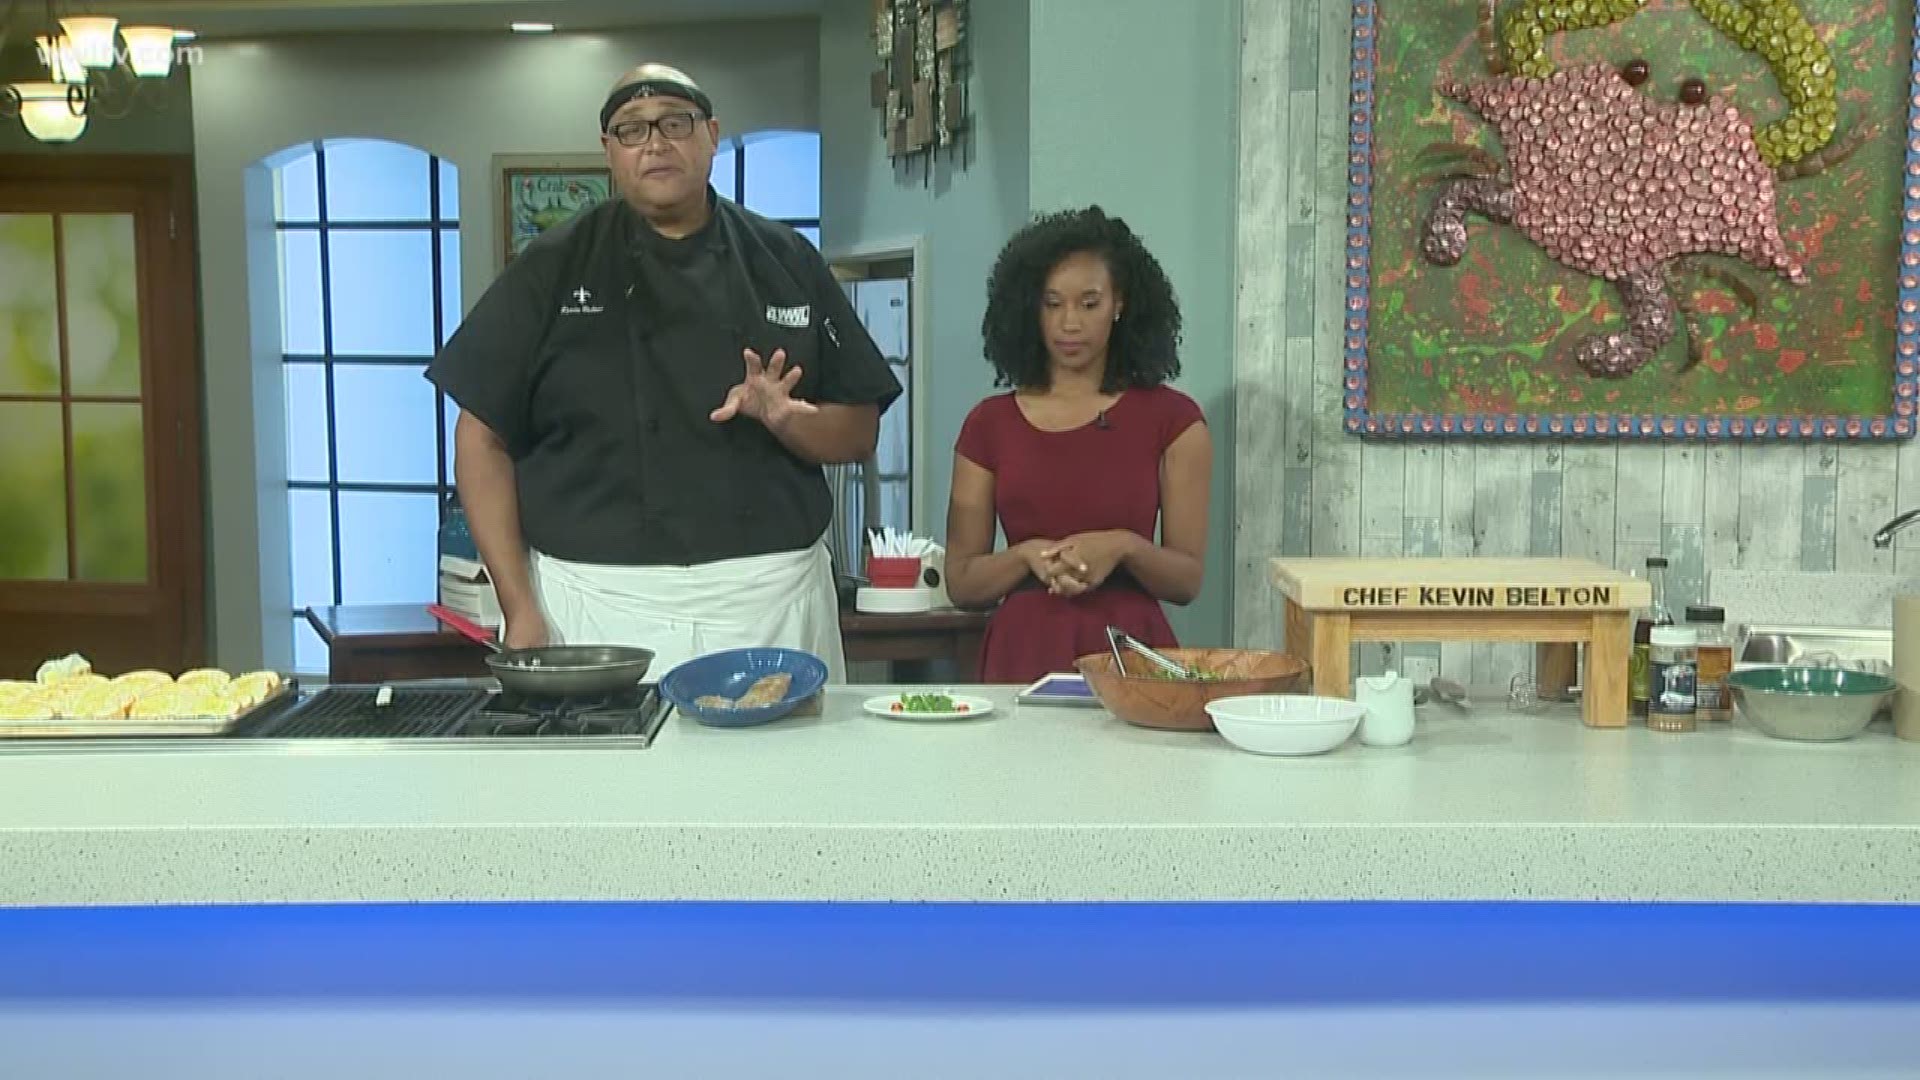 Chef Kevin and Sheba is making speckled Trout with a light salad